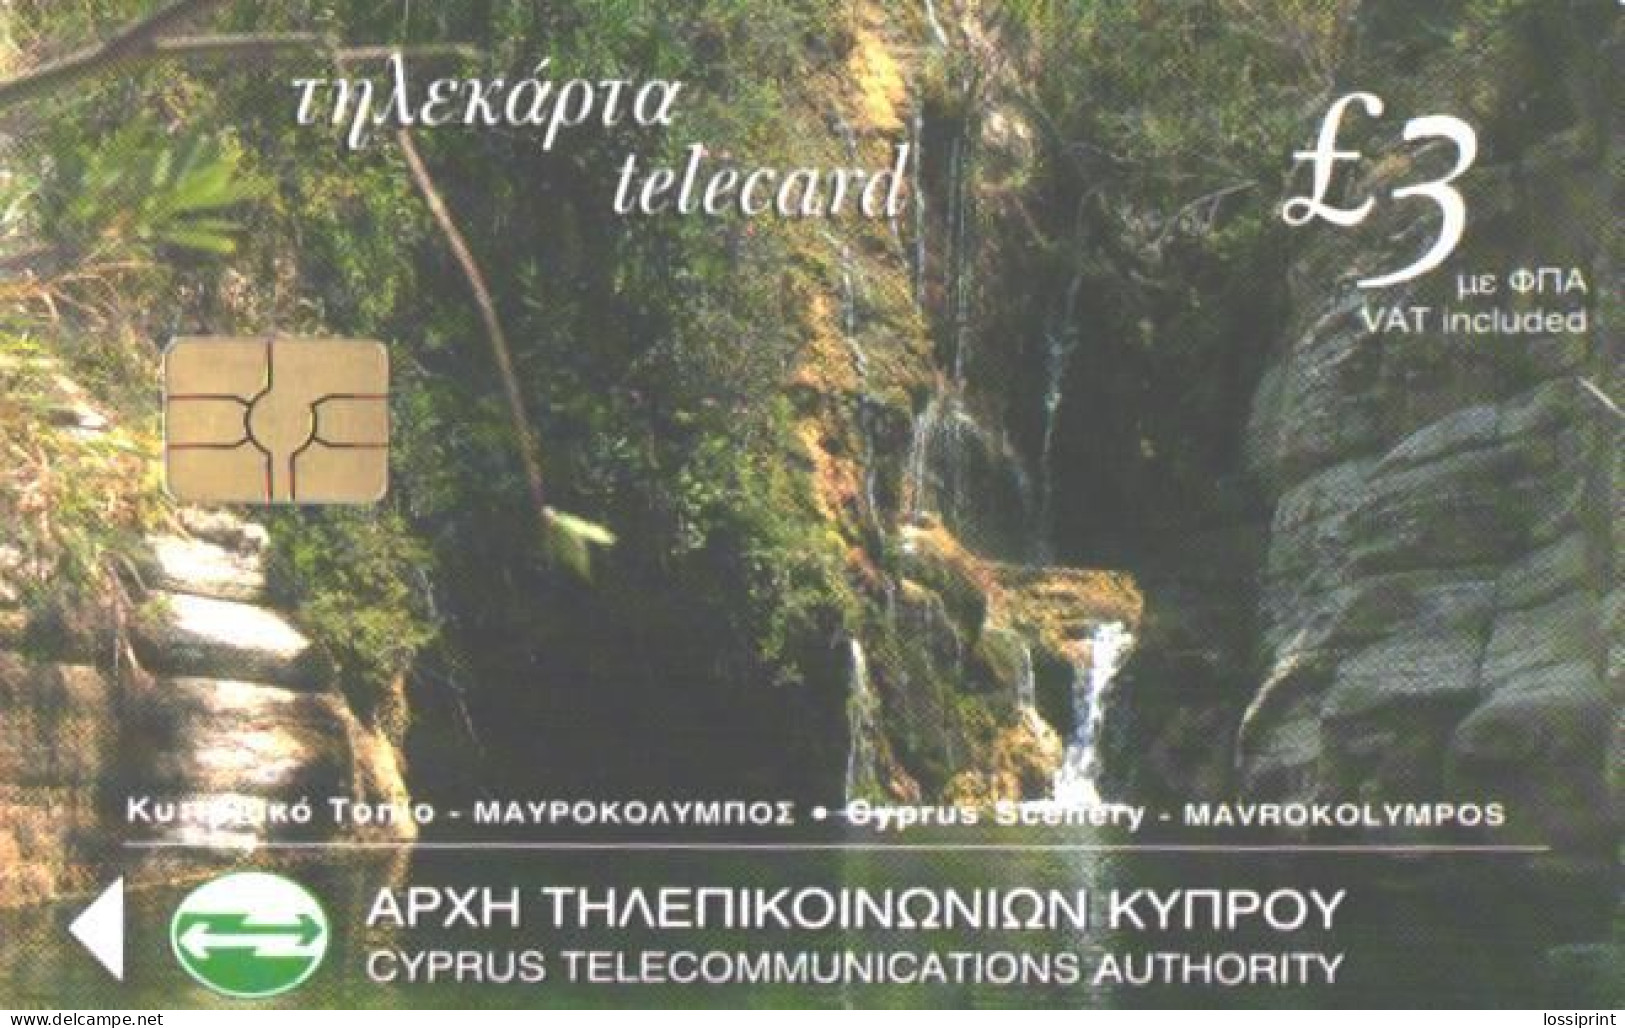 Cyprus:Used Phonecard, Cyprus Telecommunications Authority, 3£, Sunset, Waterfall, 2001 - Paysages